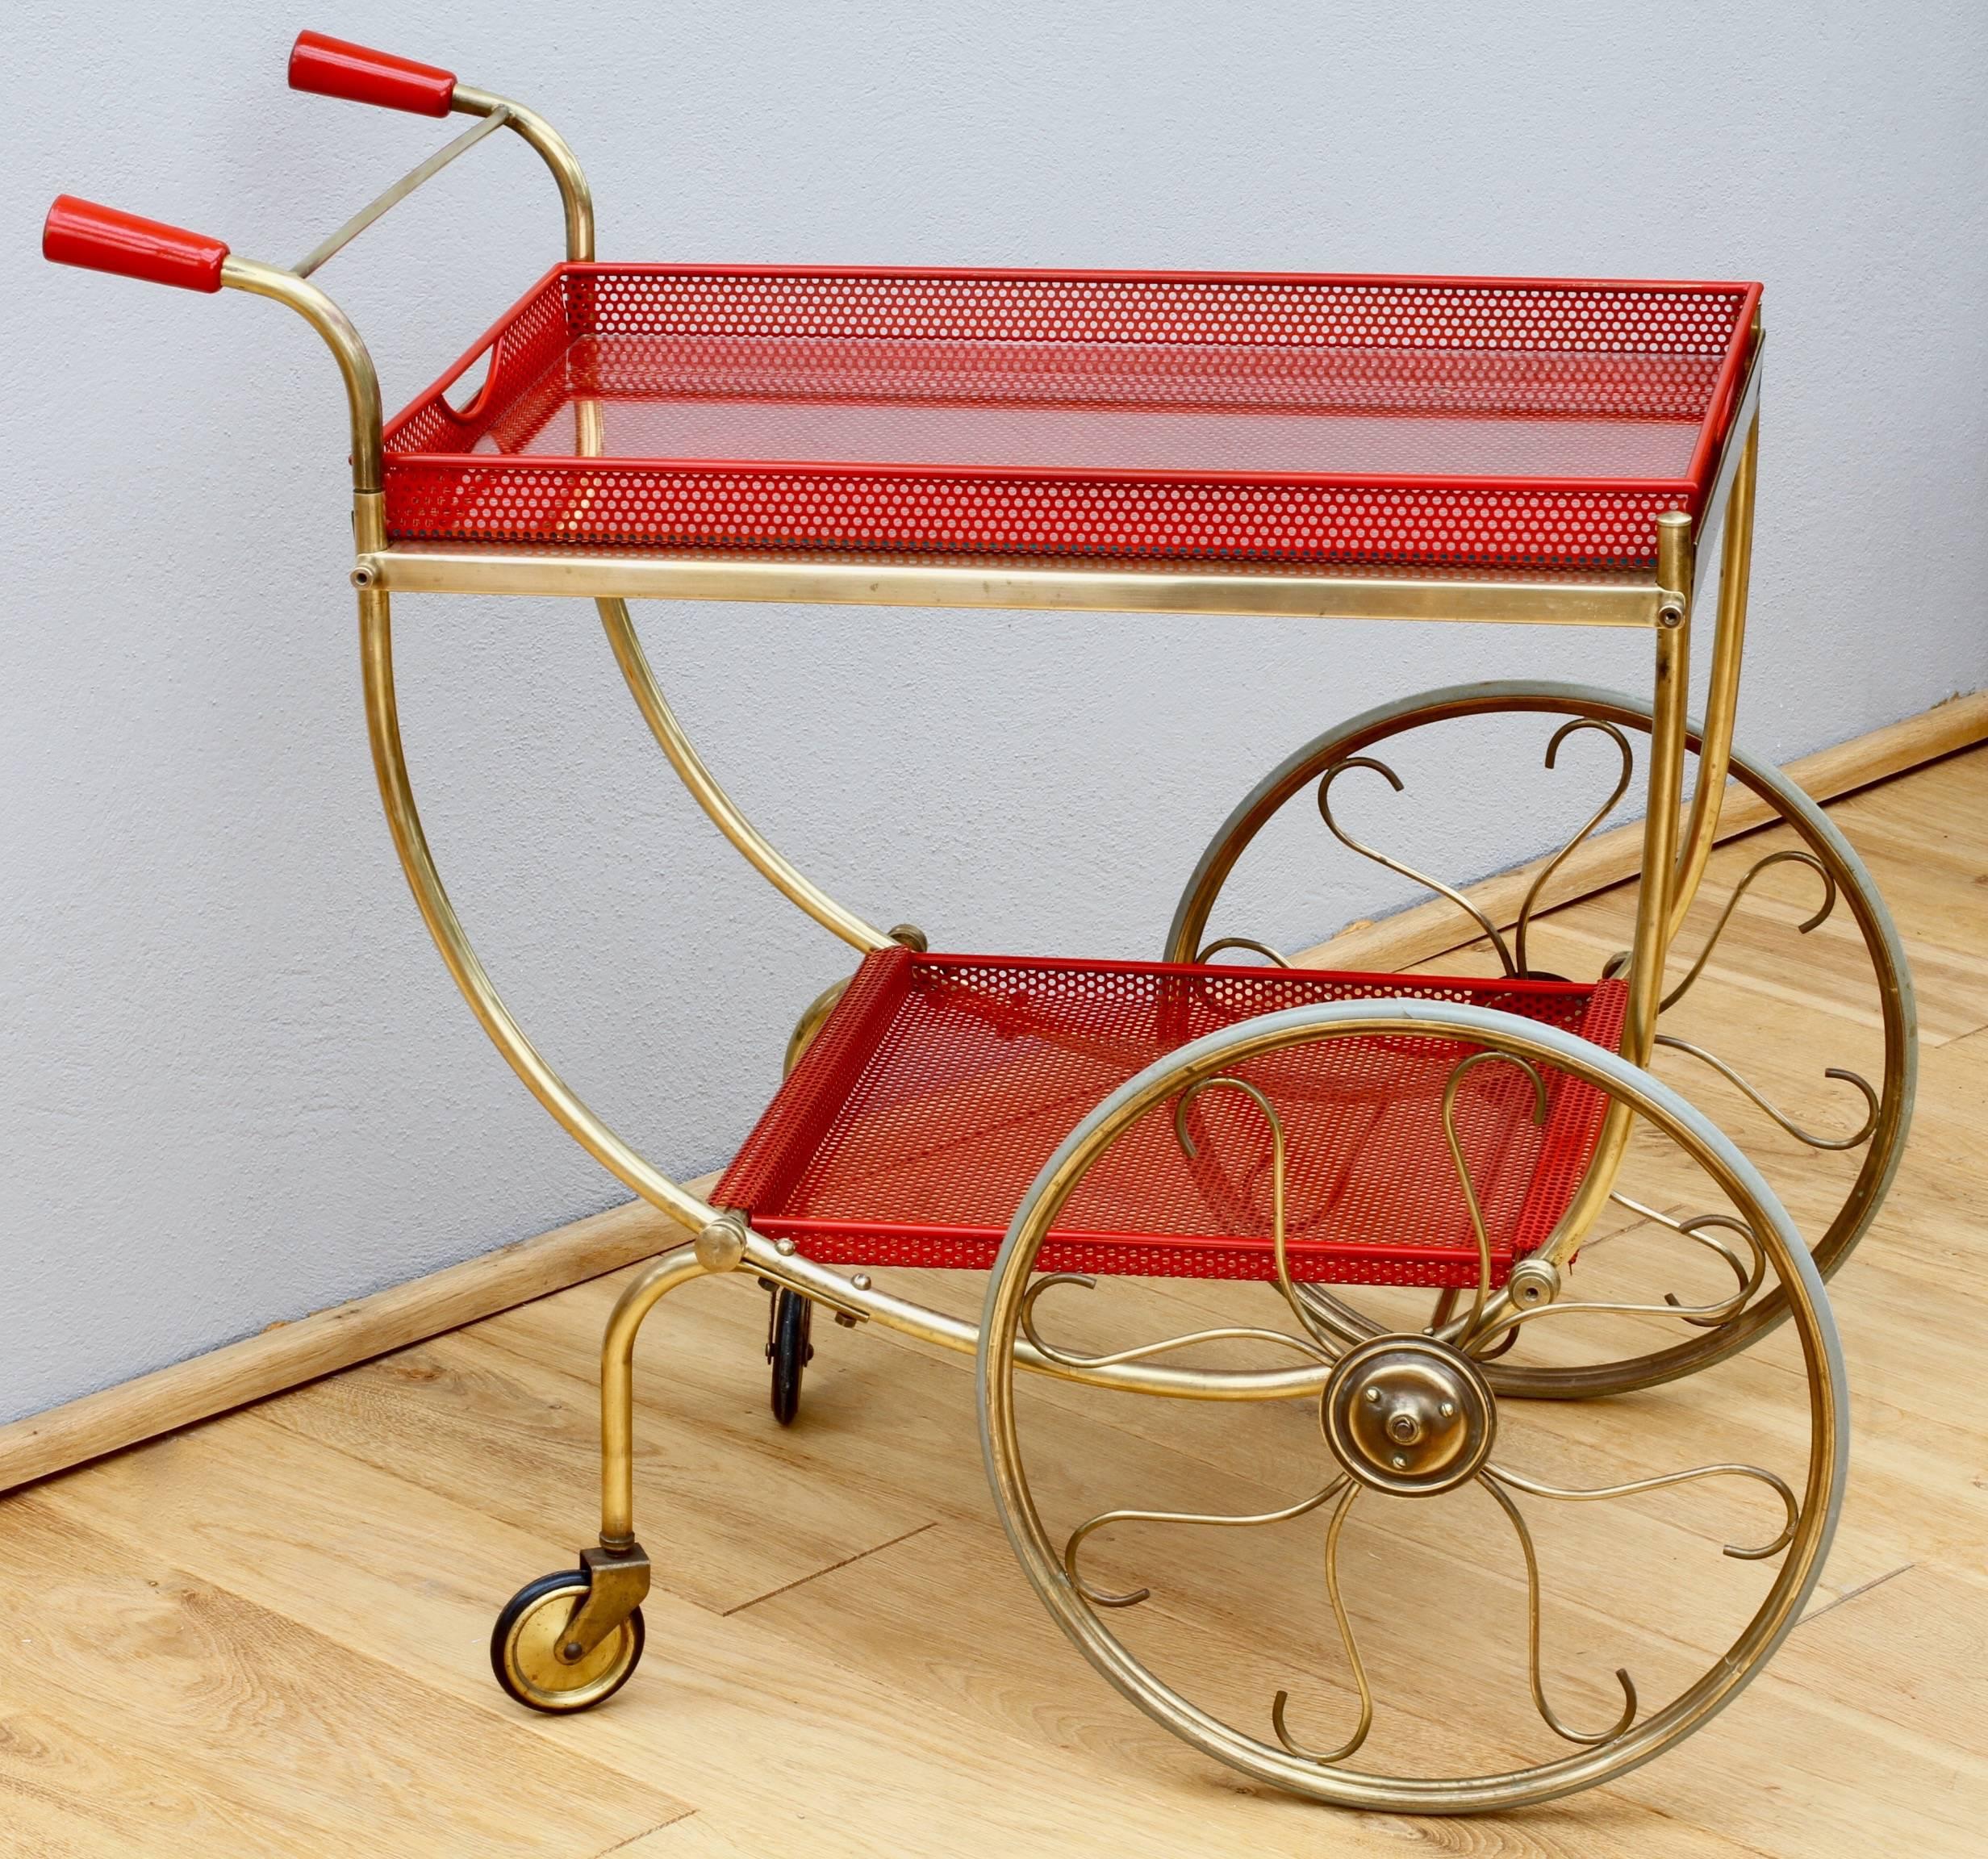 An absolutely wonderful and stunning mid century modern bar cart / drinks trolley by Swedish design company Svensk Tenn circa 1950s. Made of tubular brass and red painted perforated metal - the trolley is very much in the style of the legendary